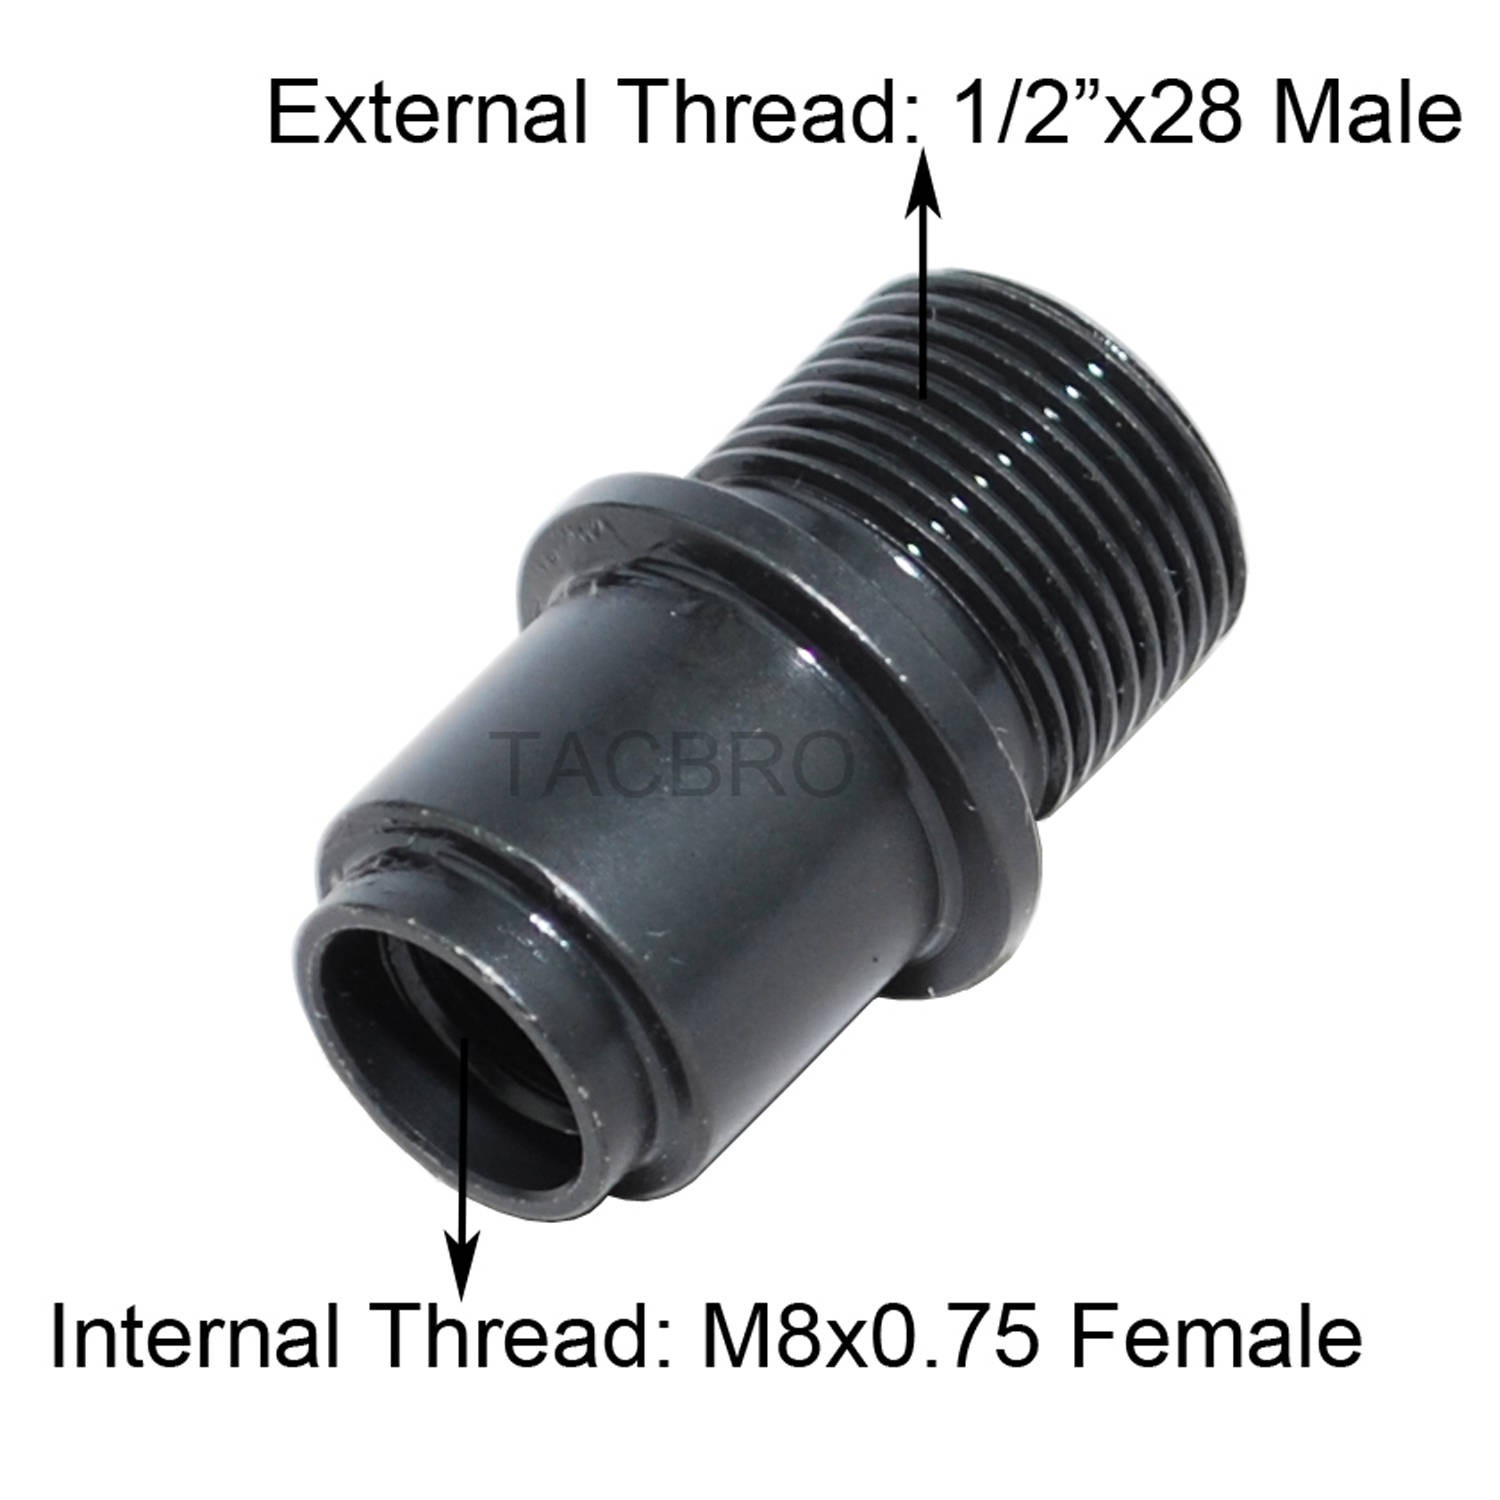 M8x.75 to 1/2x28 Muzzle Thread Adapter, Covert M8x0.75 to 1/2x28 TPI  w/Protector - Muzzle Brakes - Shop